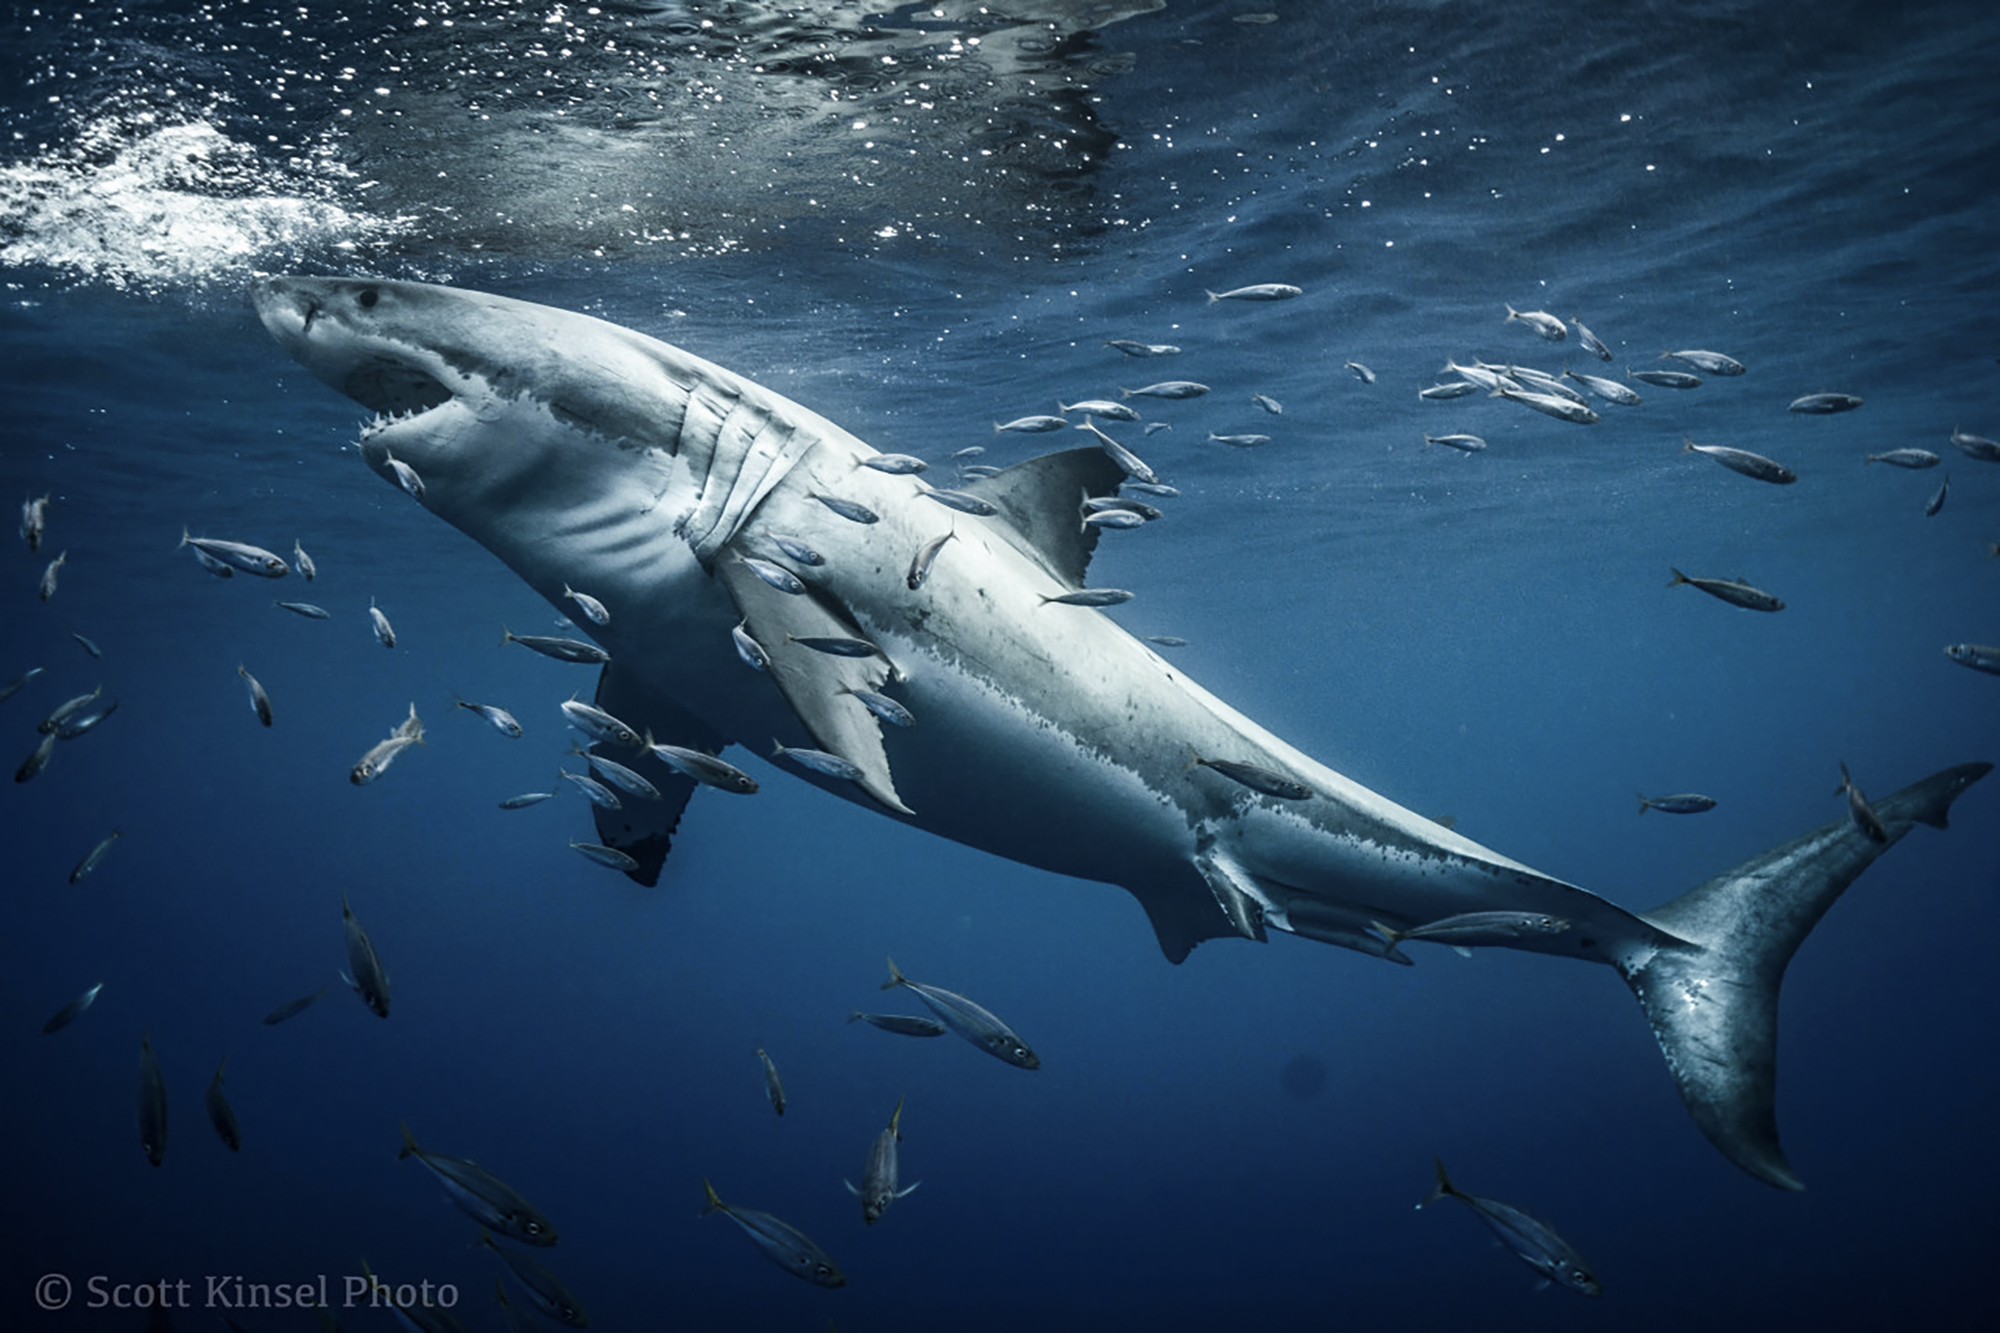 The beauty of a great white. Photo by Scott Kinsel